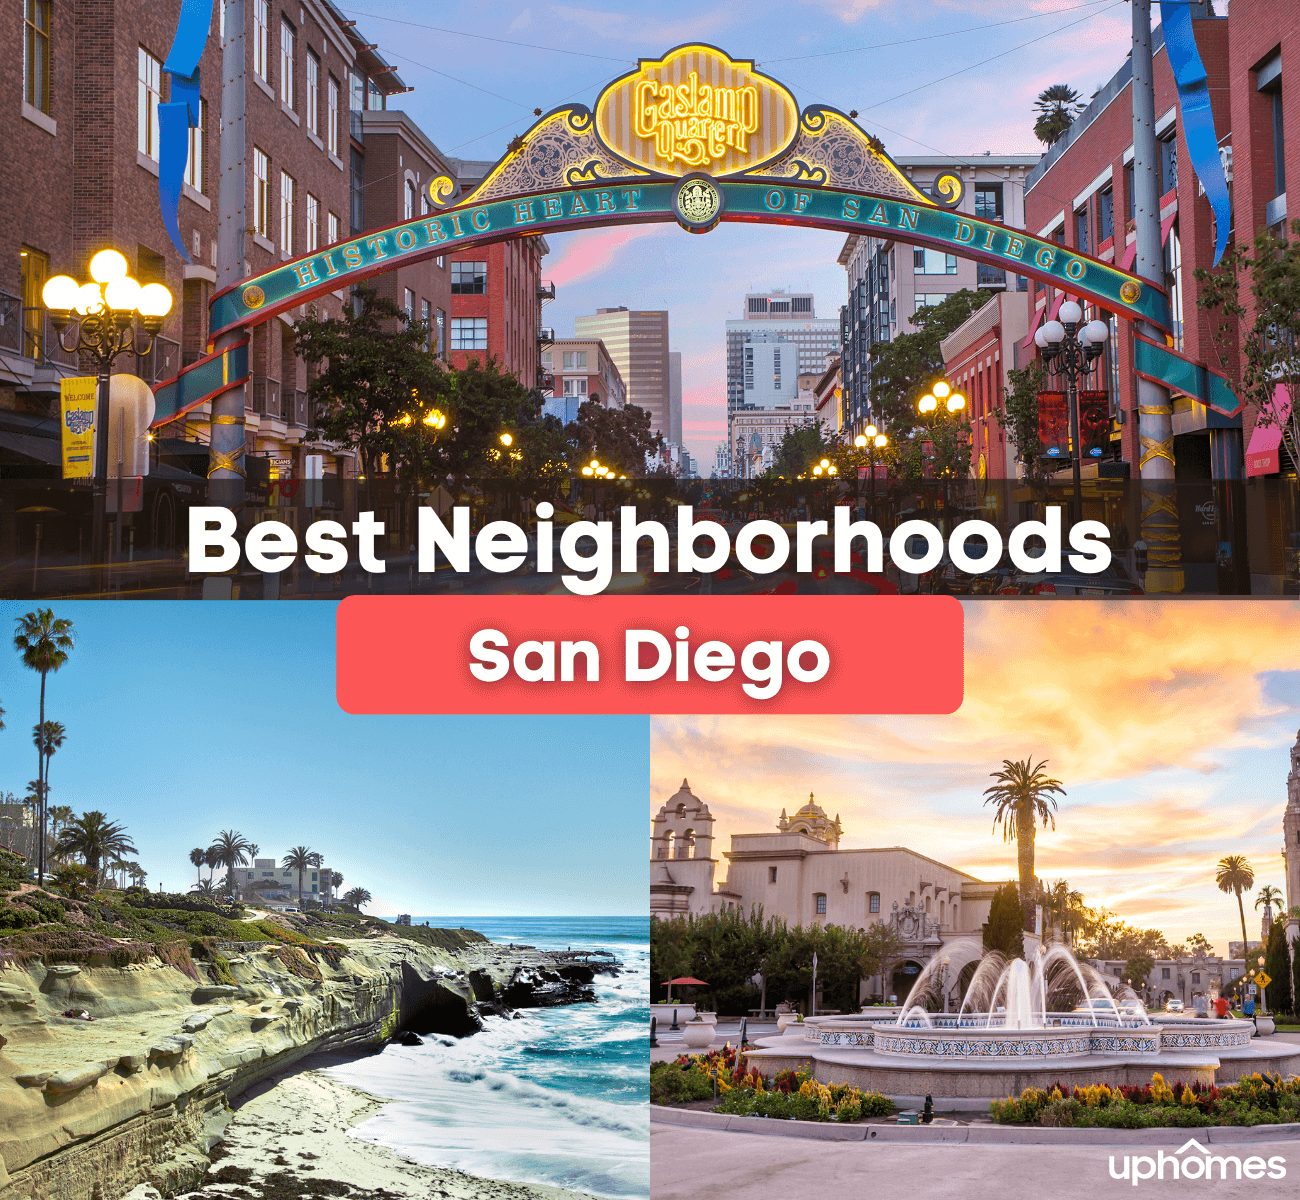 Best Neighborhoods San Diego, CA - Here are the best places to live in San Diego!